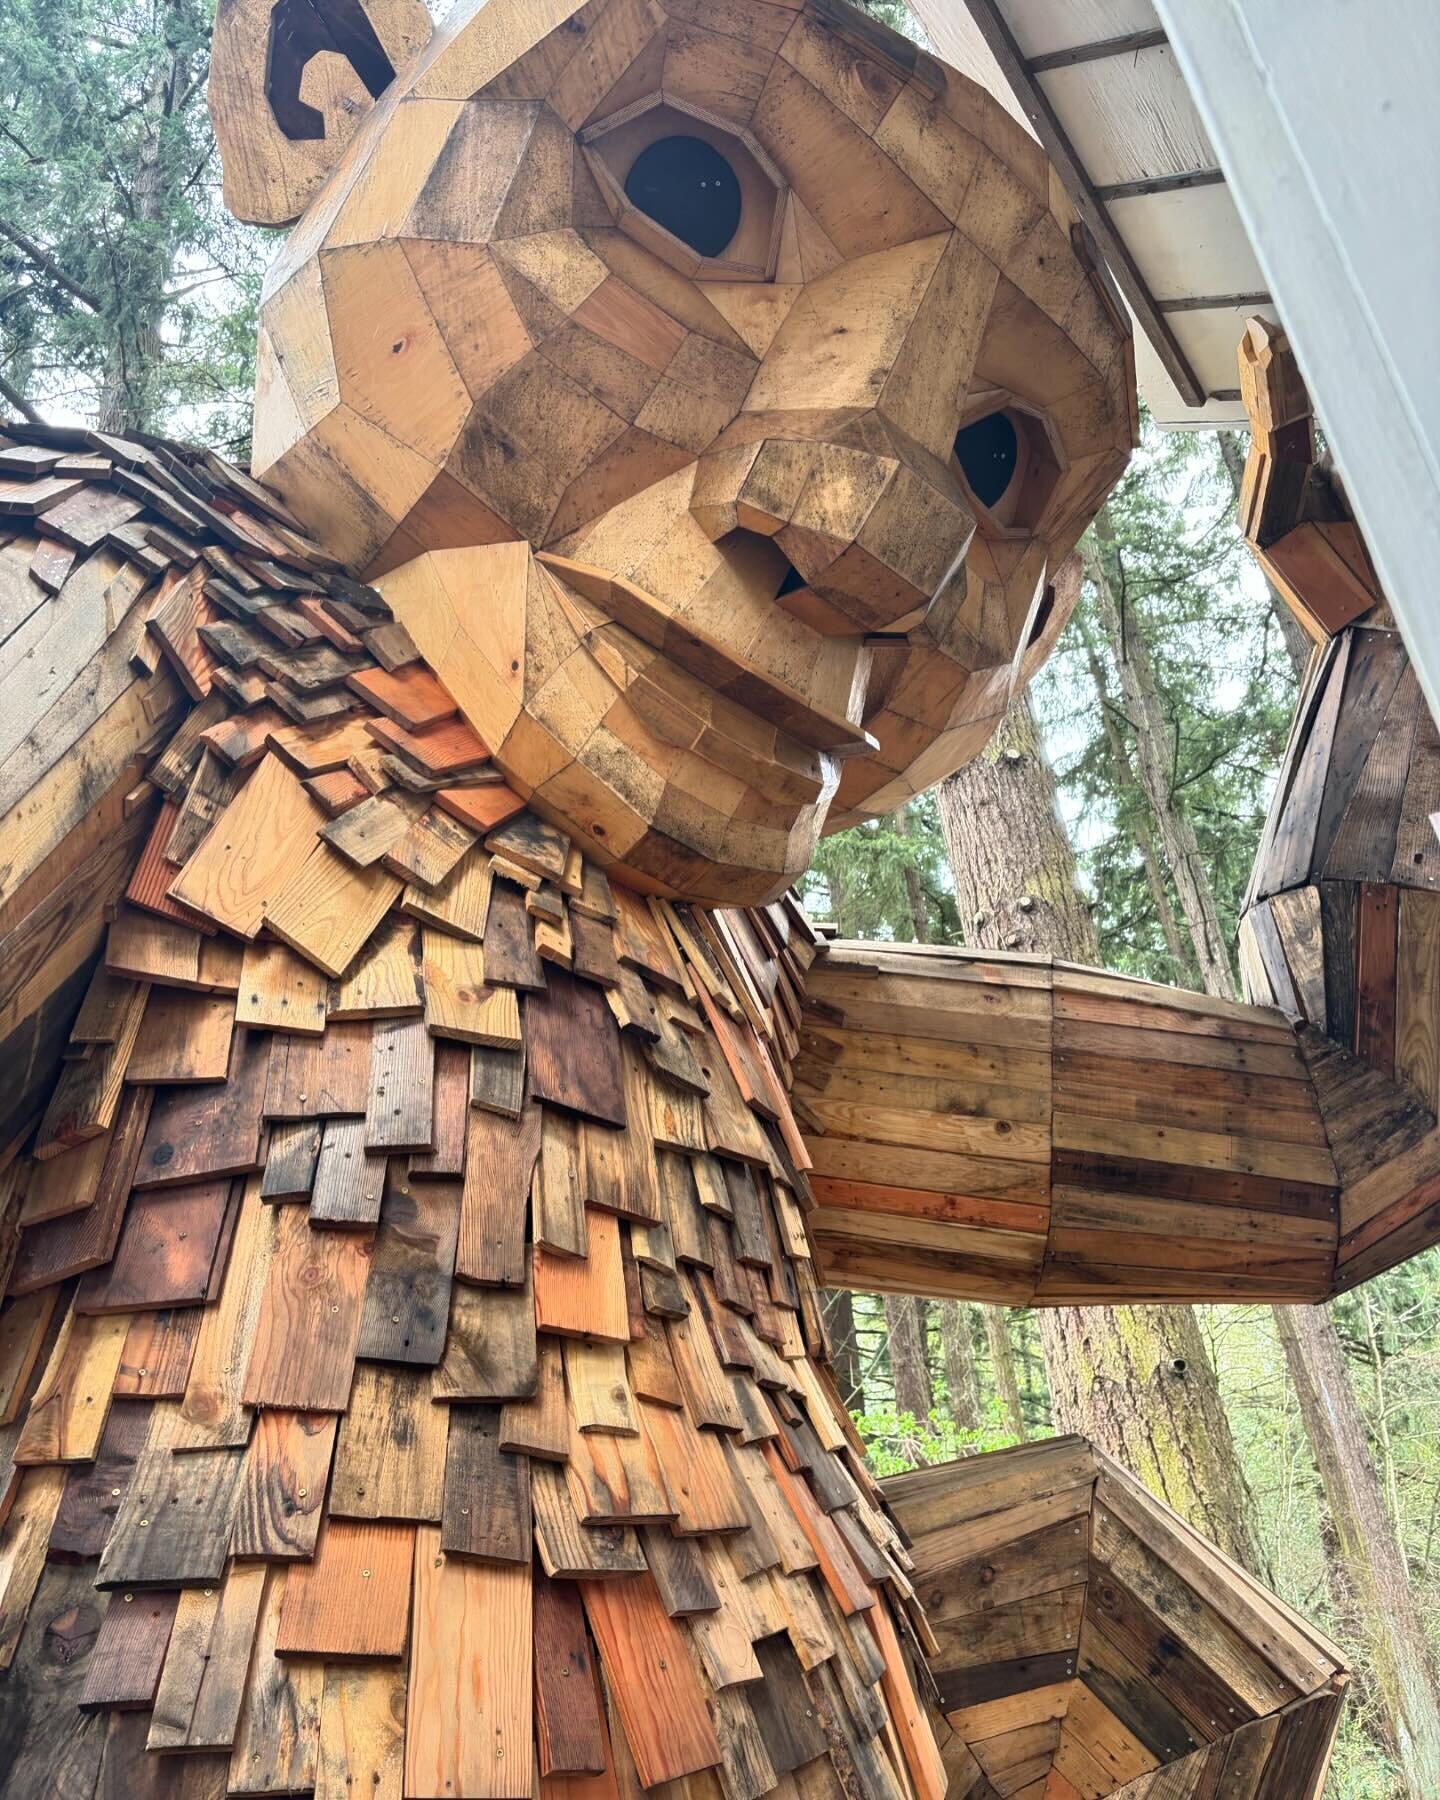 Went and saw Ole Bolle today. If you get a chance to see any of the sculptures by artist @thomasdambo - do it. #sculpture #recycleartist #troll #nordicnorthwest